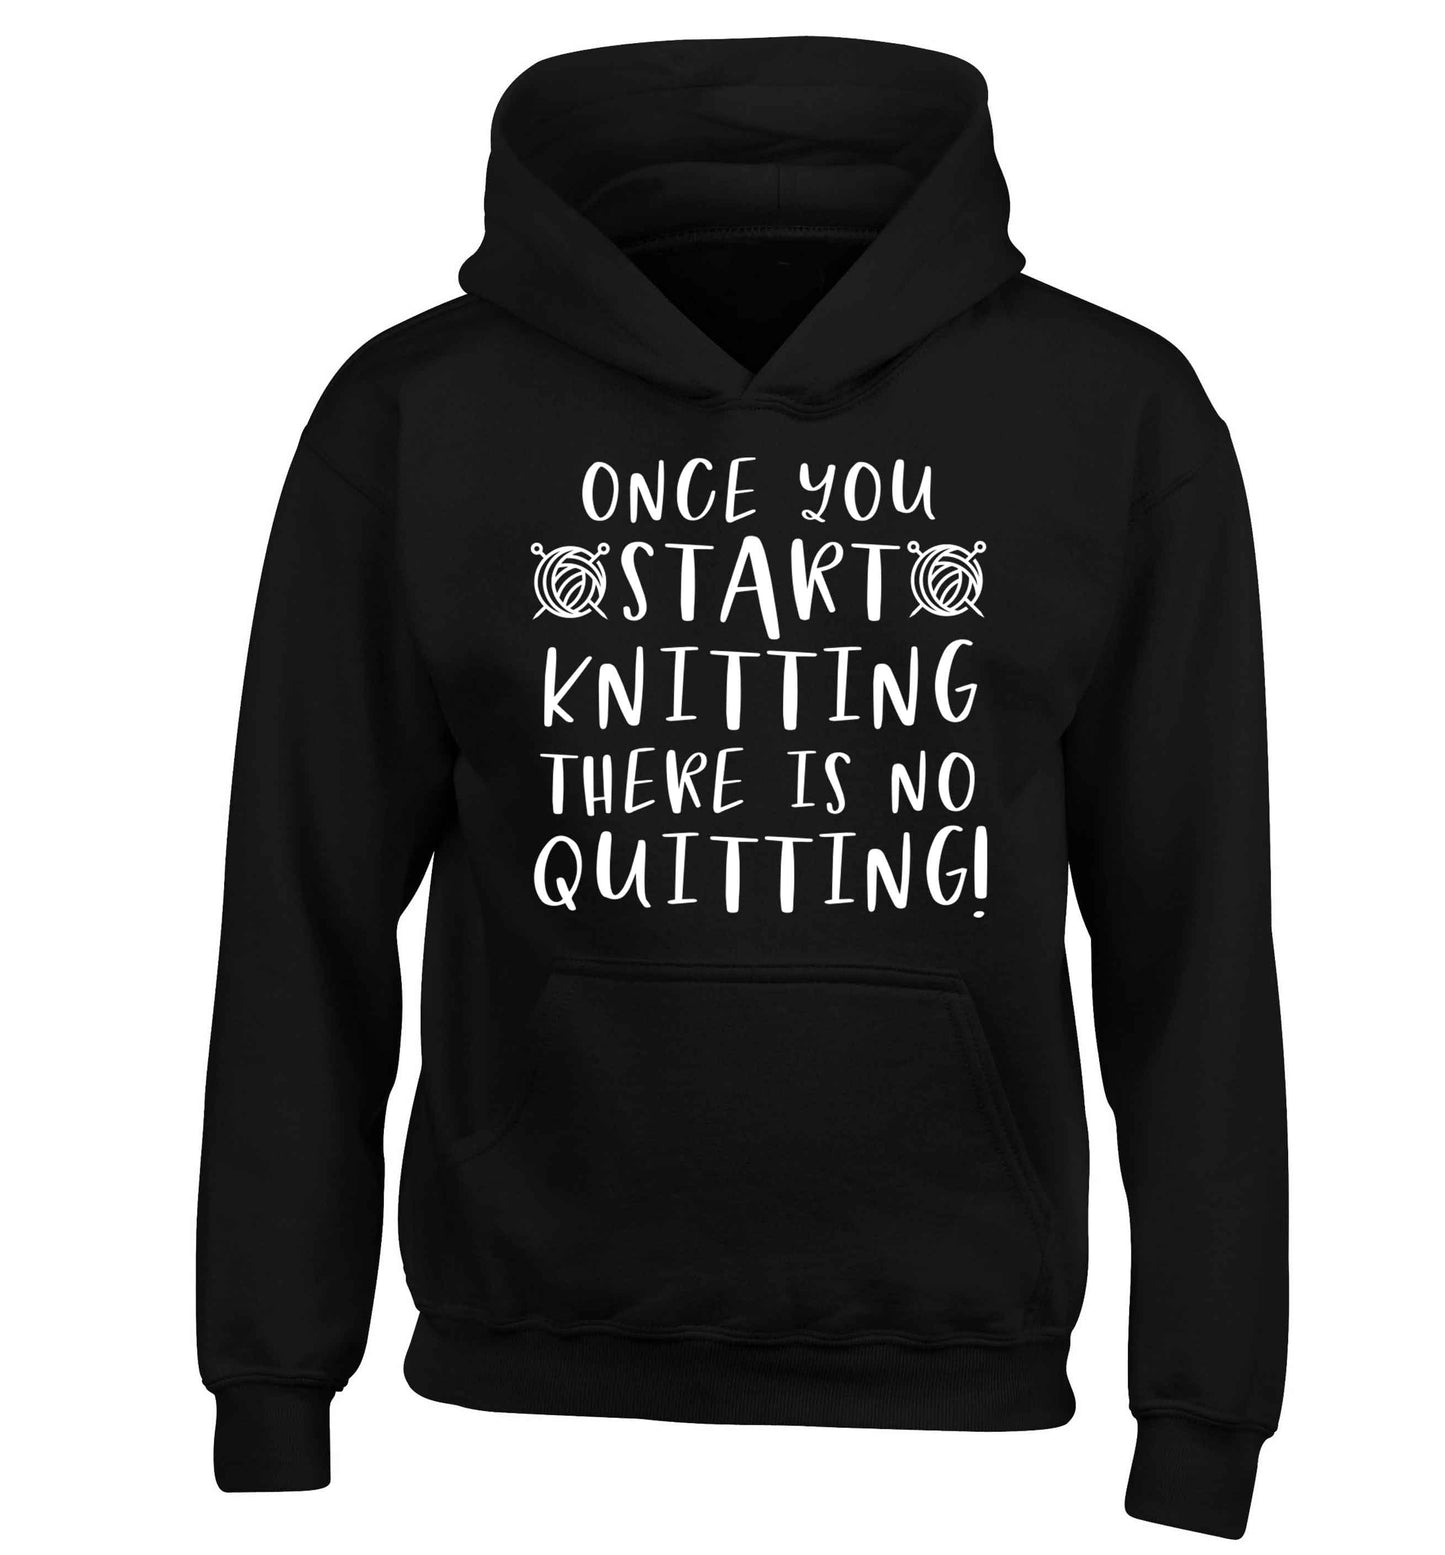 Once you start knitting there is no quitting! children's black hoodie 12-13 Years